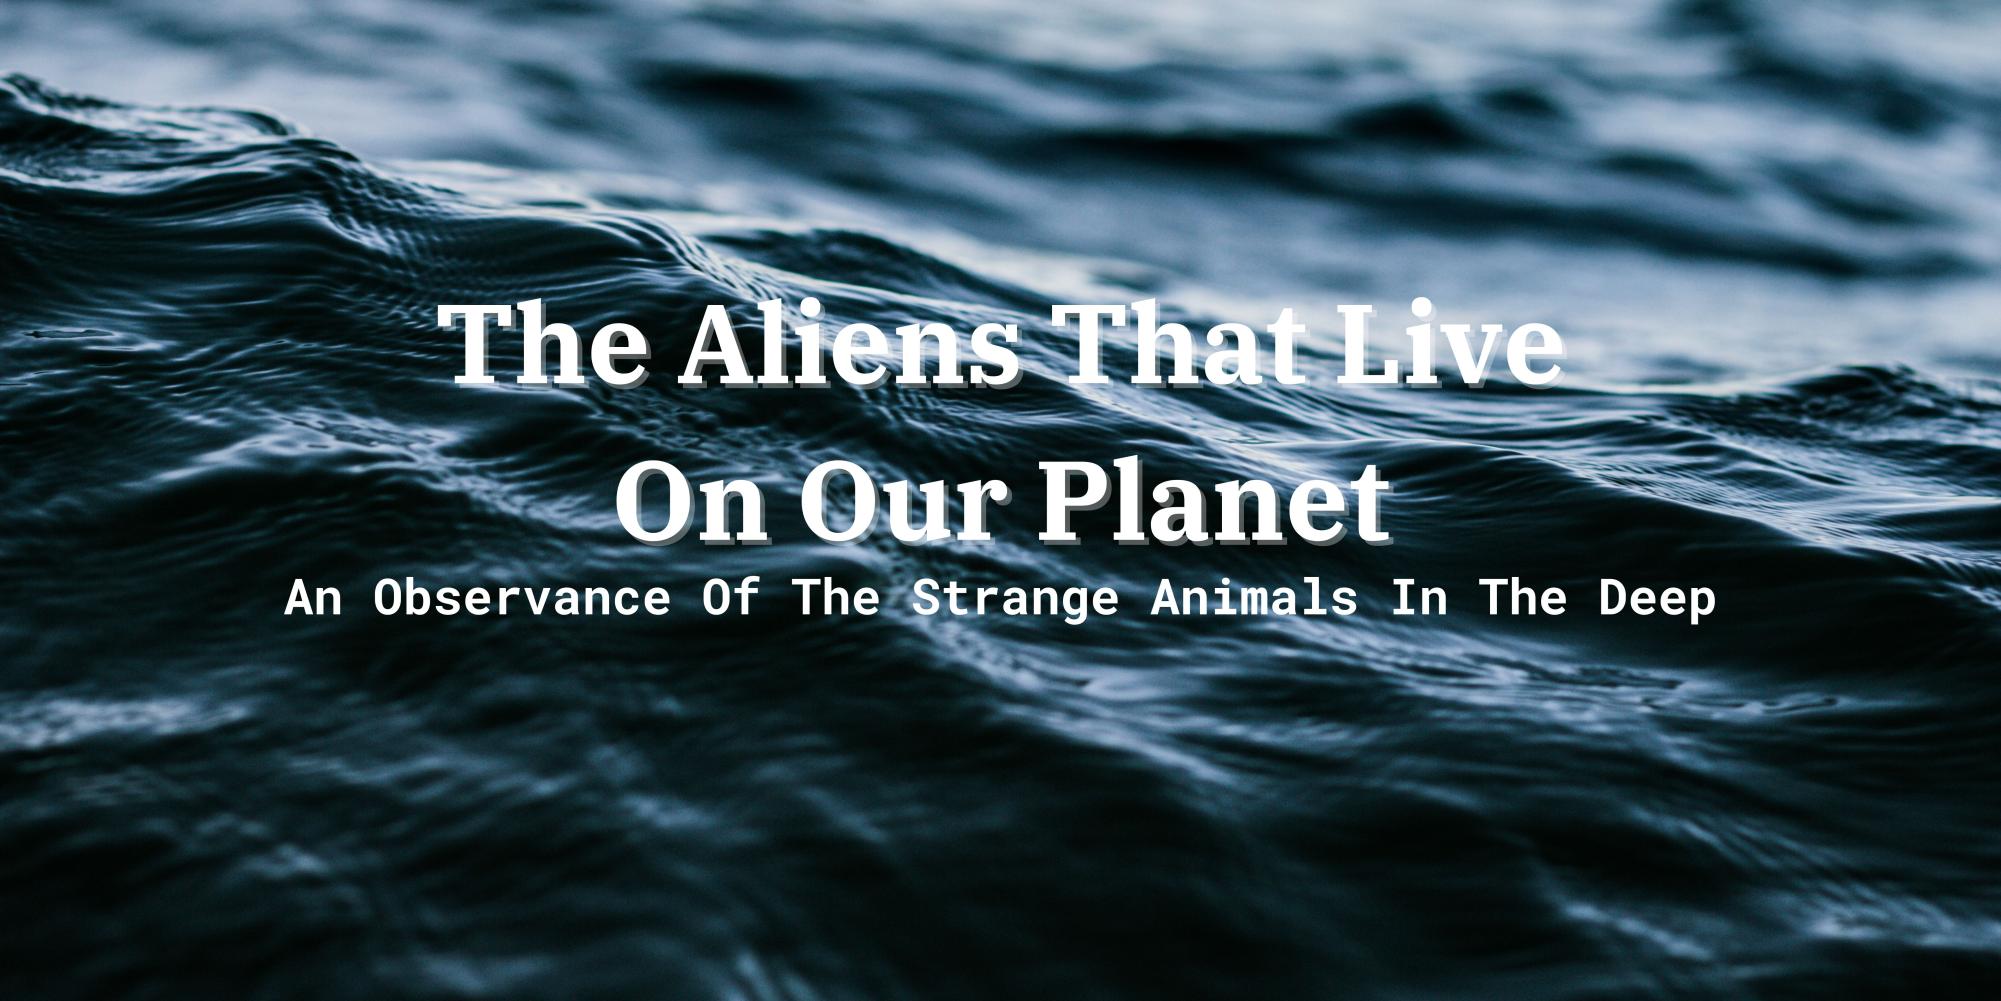 The Aliens That Live On Our Planet - An Observance Of The Strange Animals In The Deep